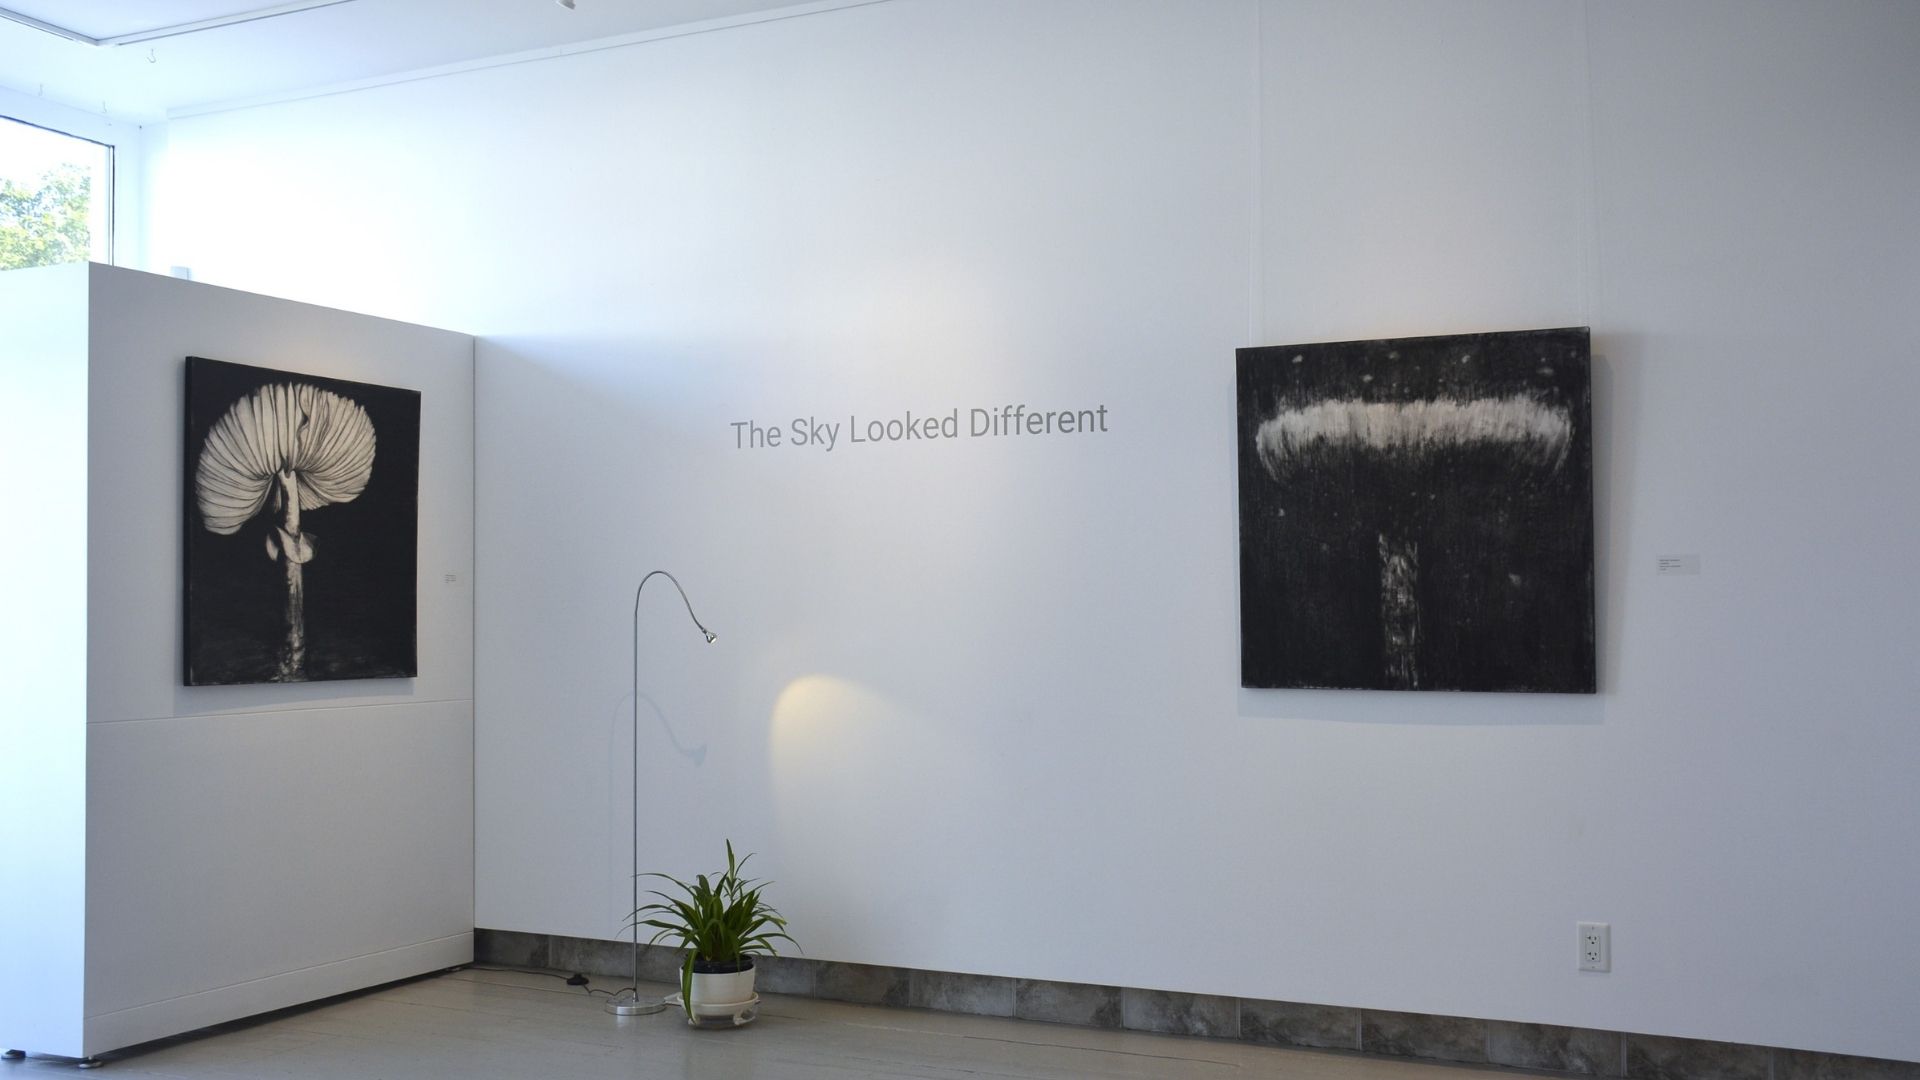 KELLY HARPER MOREHOUSE The Sky Looked Different SEPT 22 – OCT 14